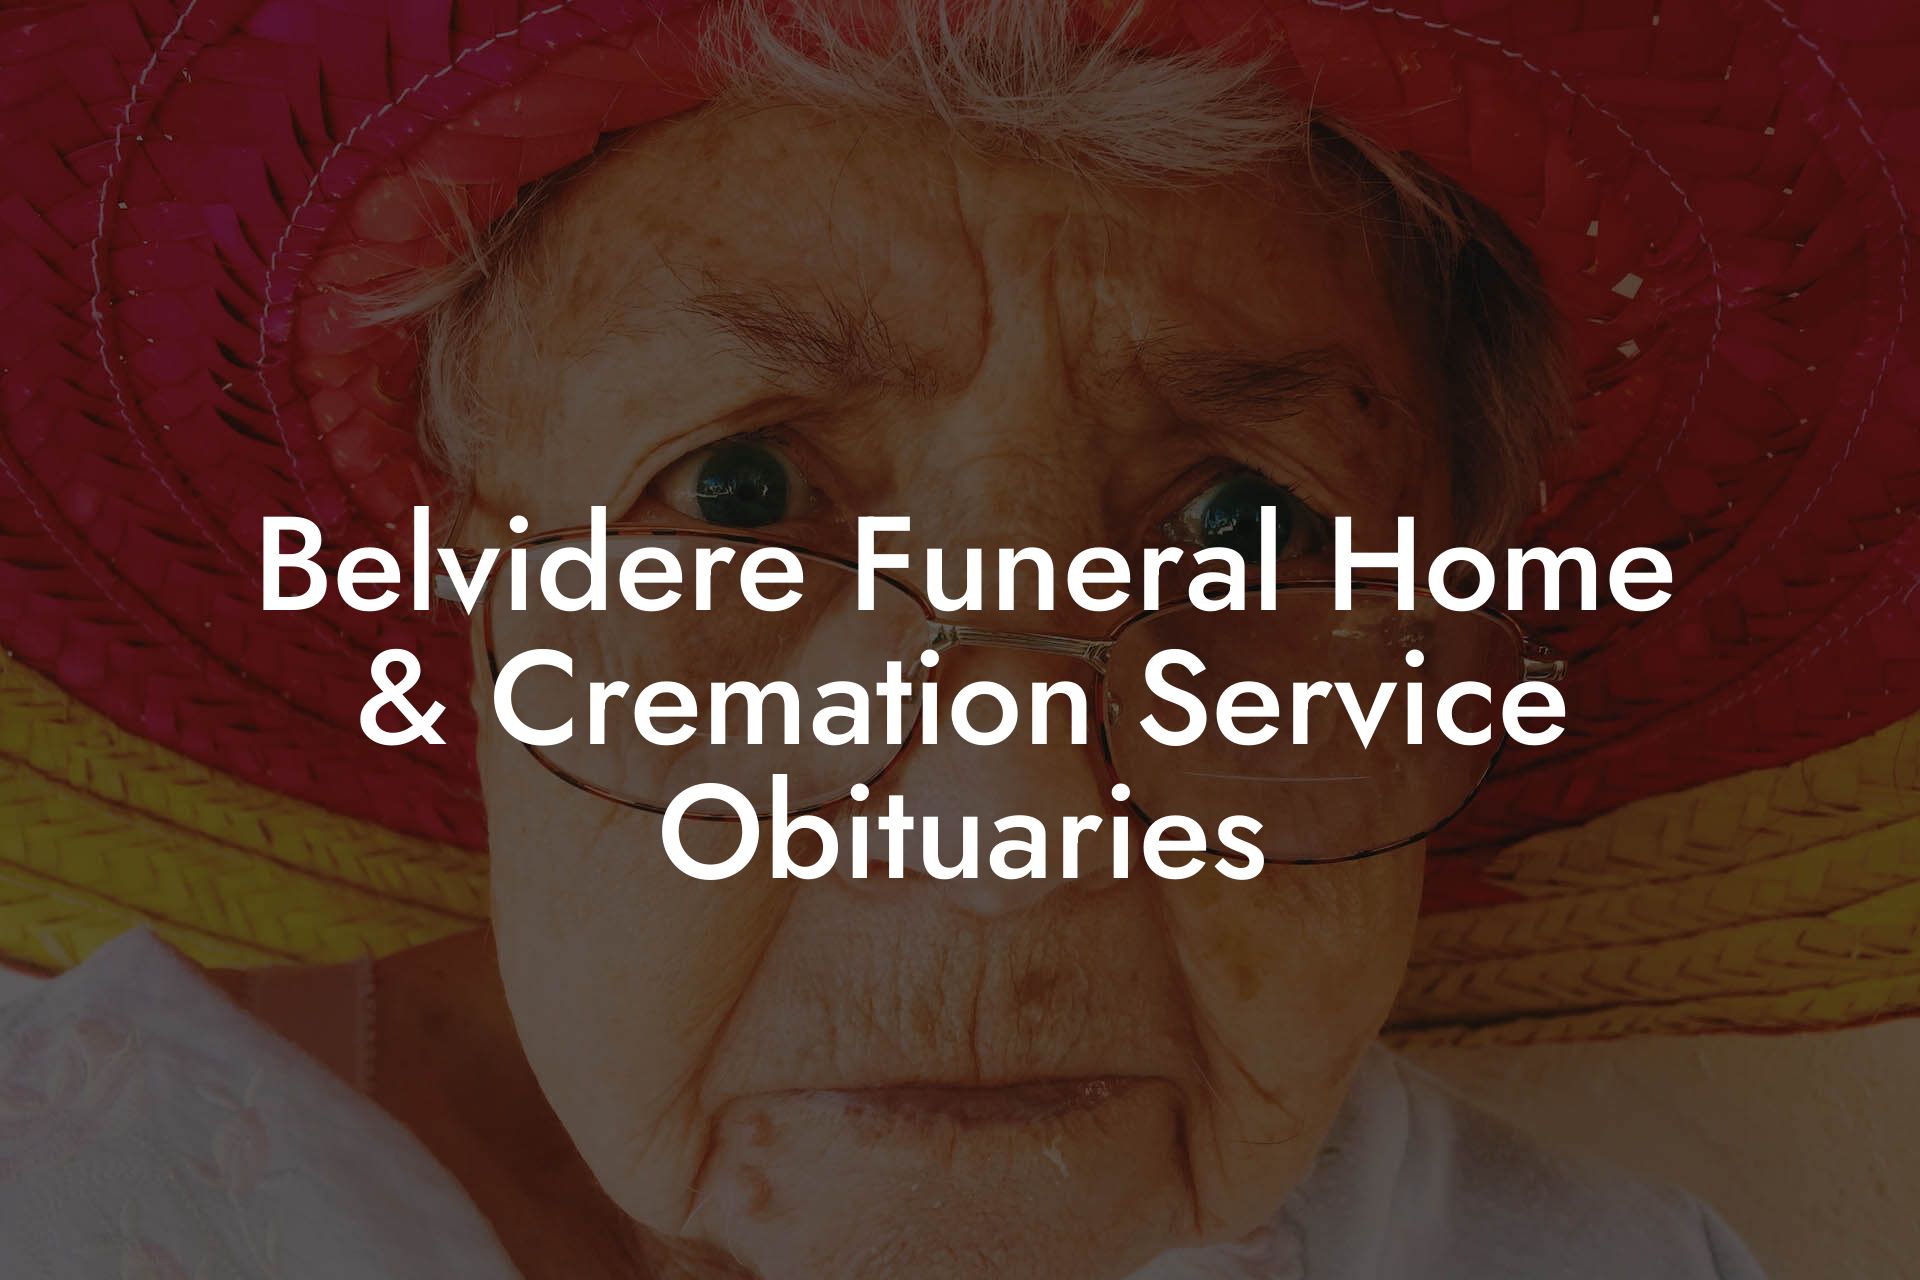 Belvidere Funeral Home & Cremation Service Obituaries